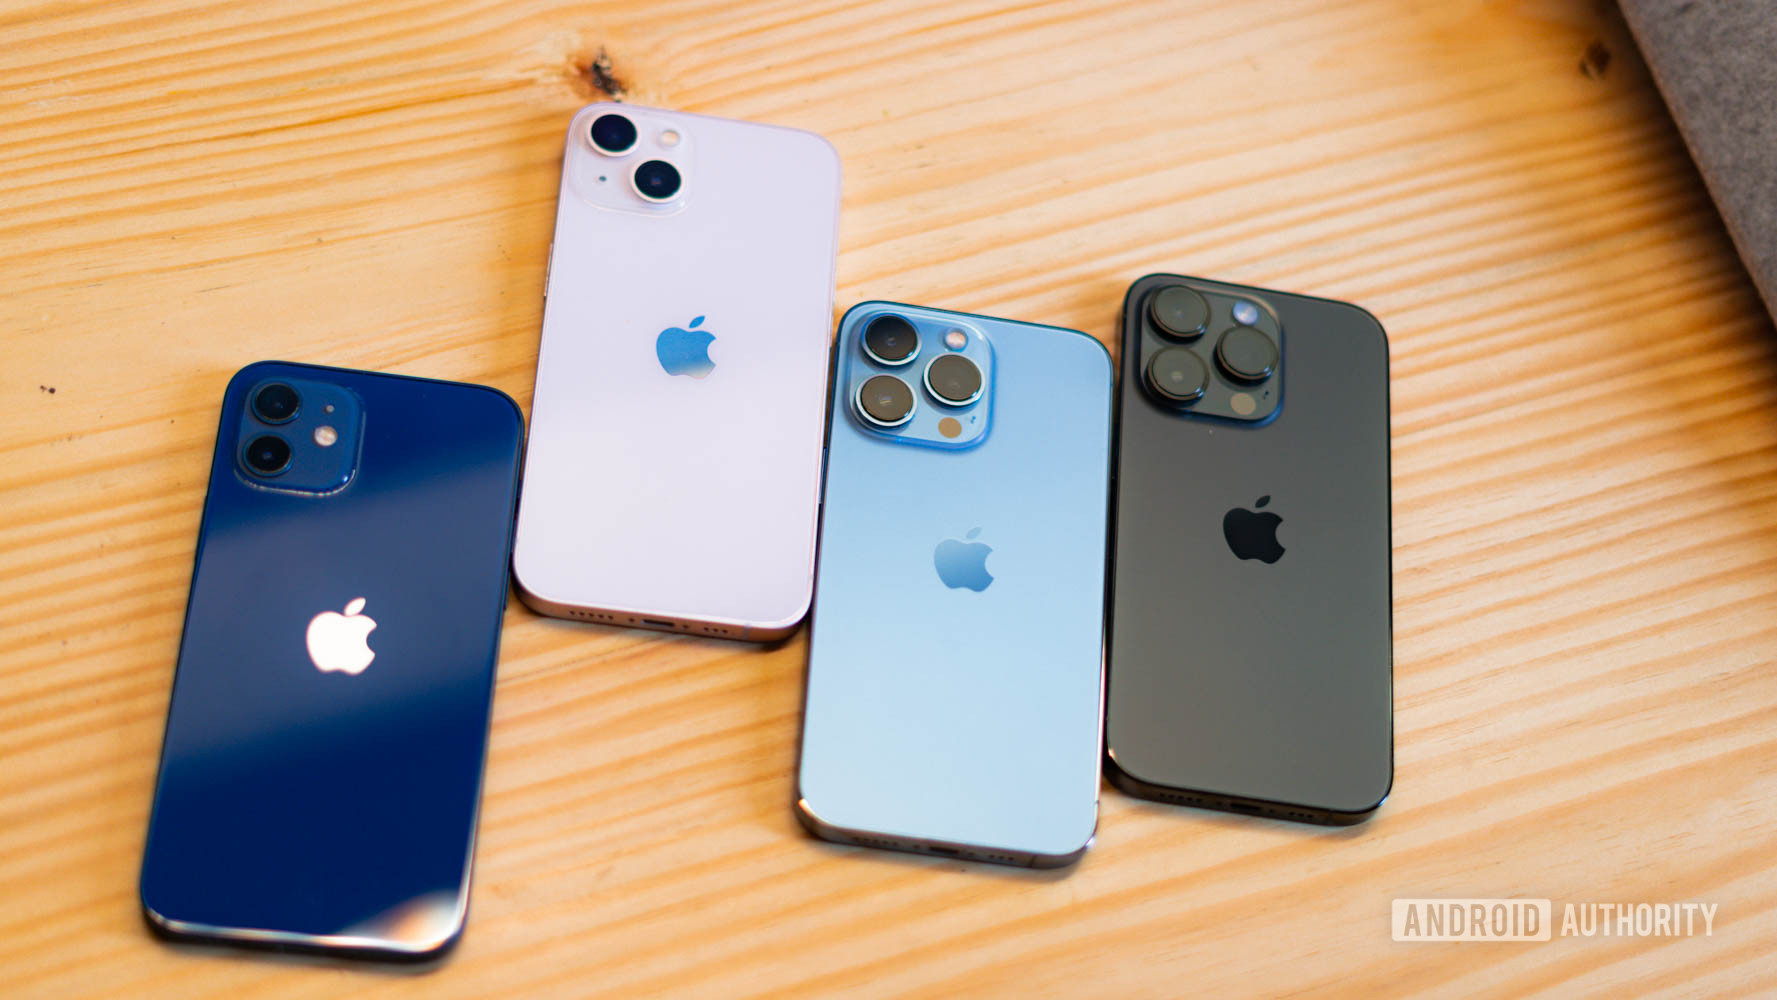 Four iPhones lying face down showing the rear view